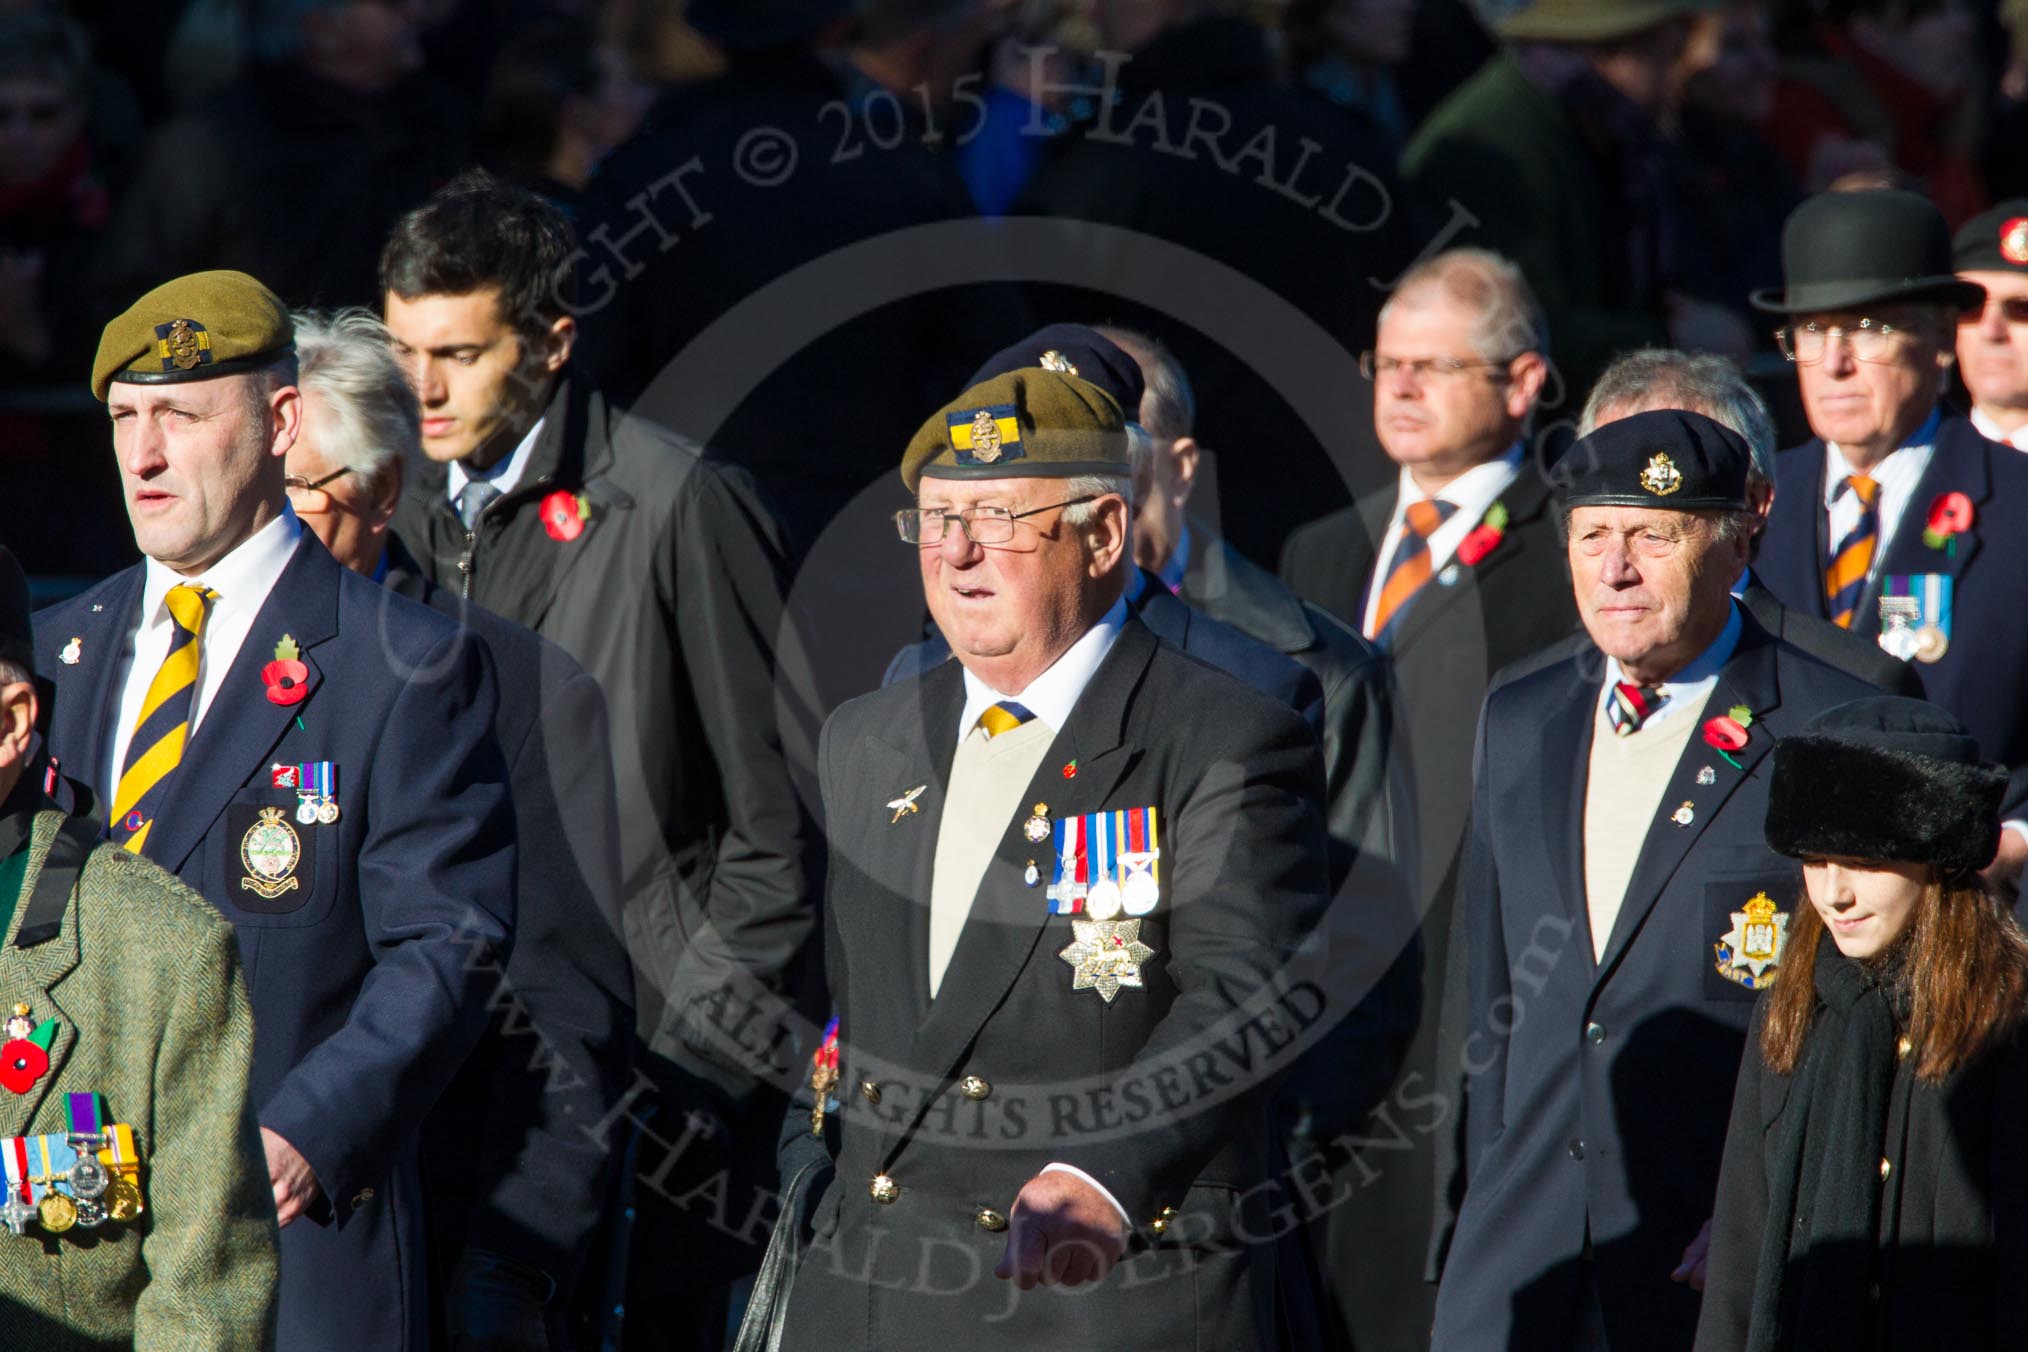 Remembrance Sunday Cenotaph March Past 2013: A30 - Princess of Wales's Royal Regiment..
Press stand opposite the Foreign Office building, Whitehall, London SW1,
London,
Greater London,
United Kingdom,
on 10 November 2013 at 11:58, image #1278